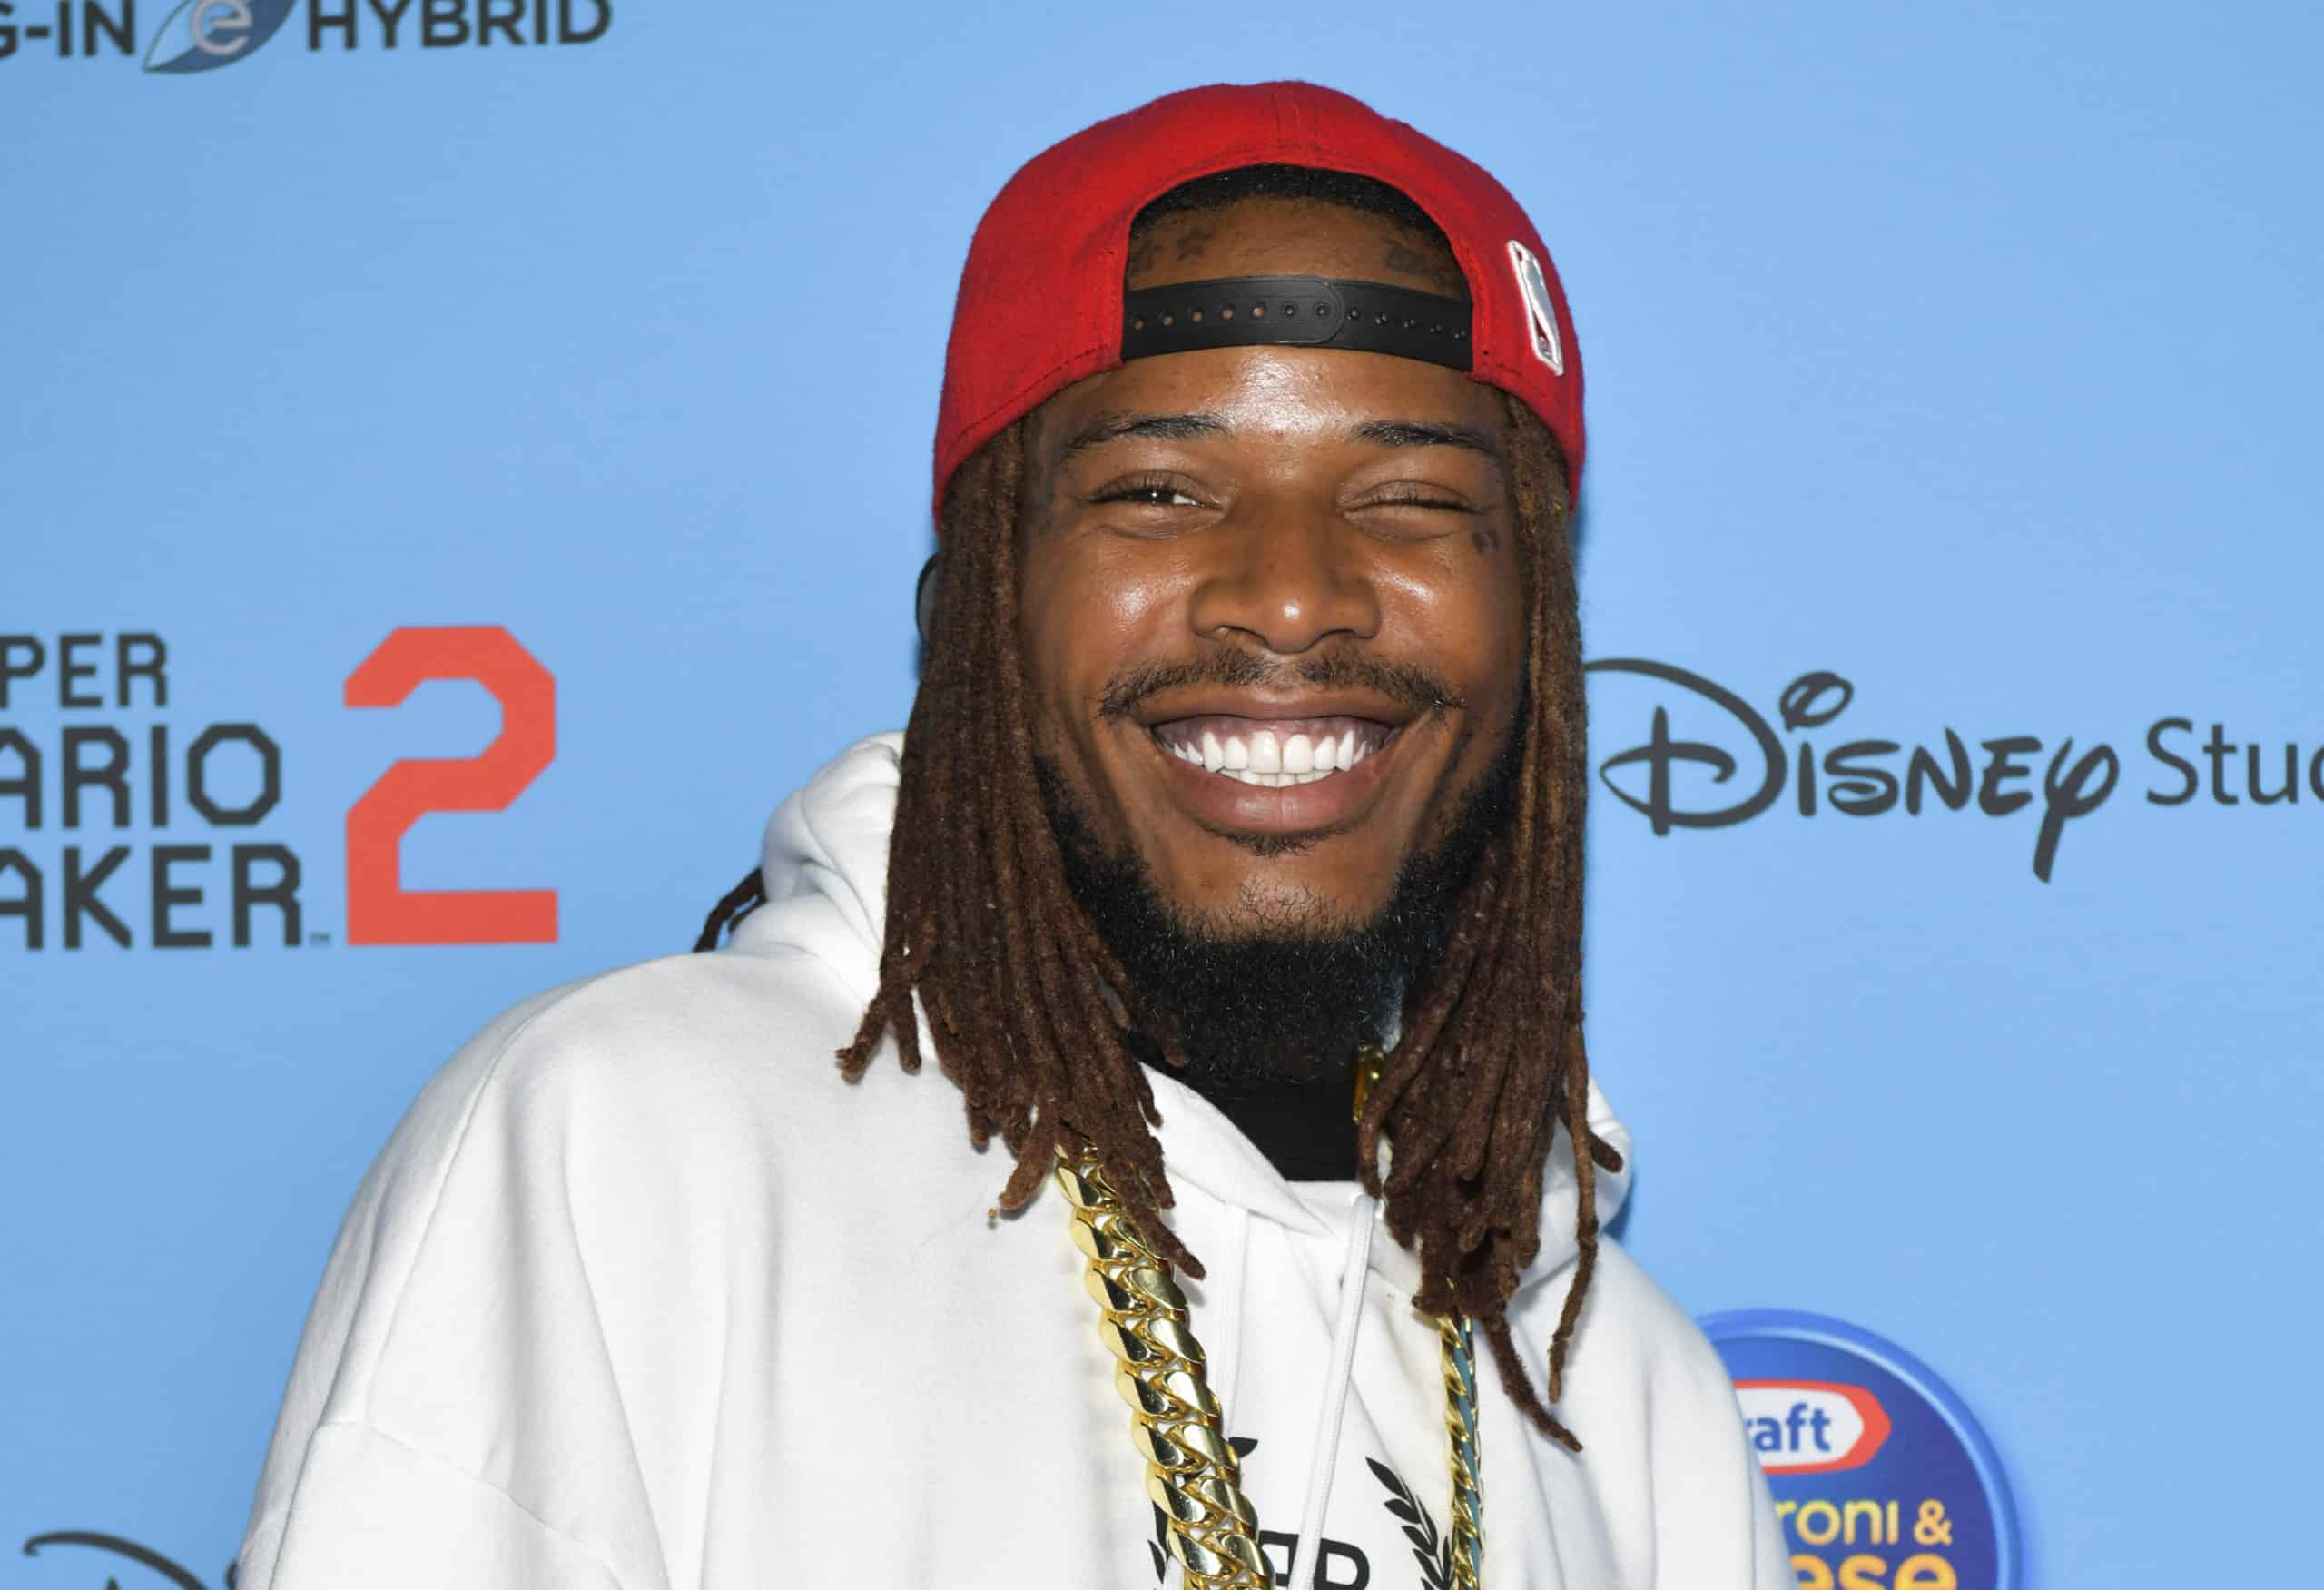 Fetty Wap Arrested For Threatening To Kill “Rat” Over FaceTime